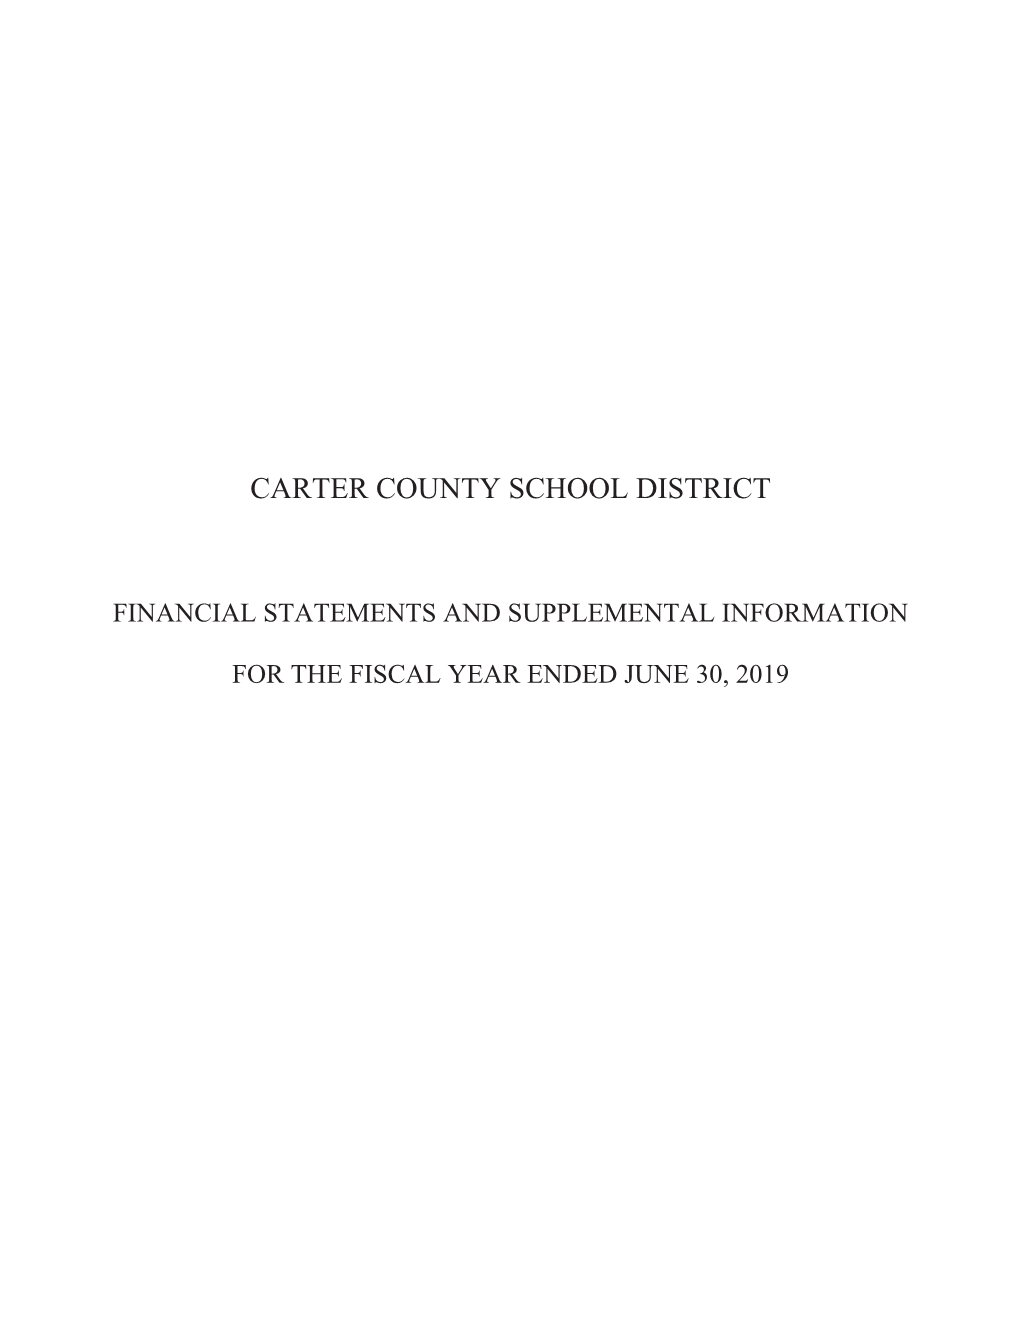 |Carter County Board of Education|A01581|Audit